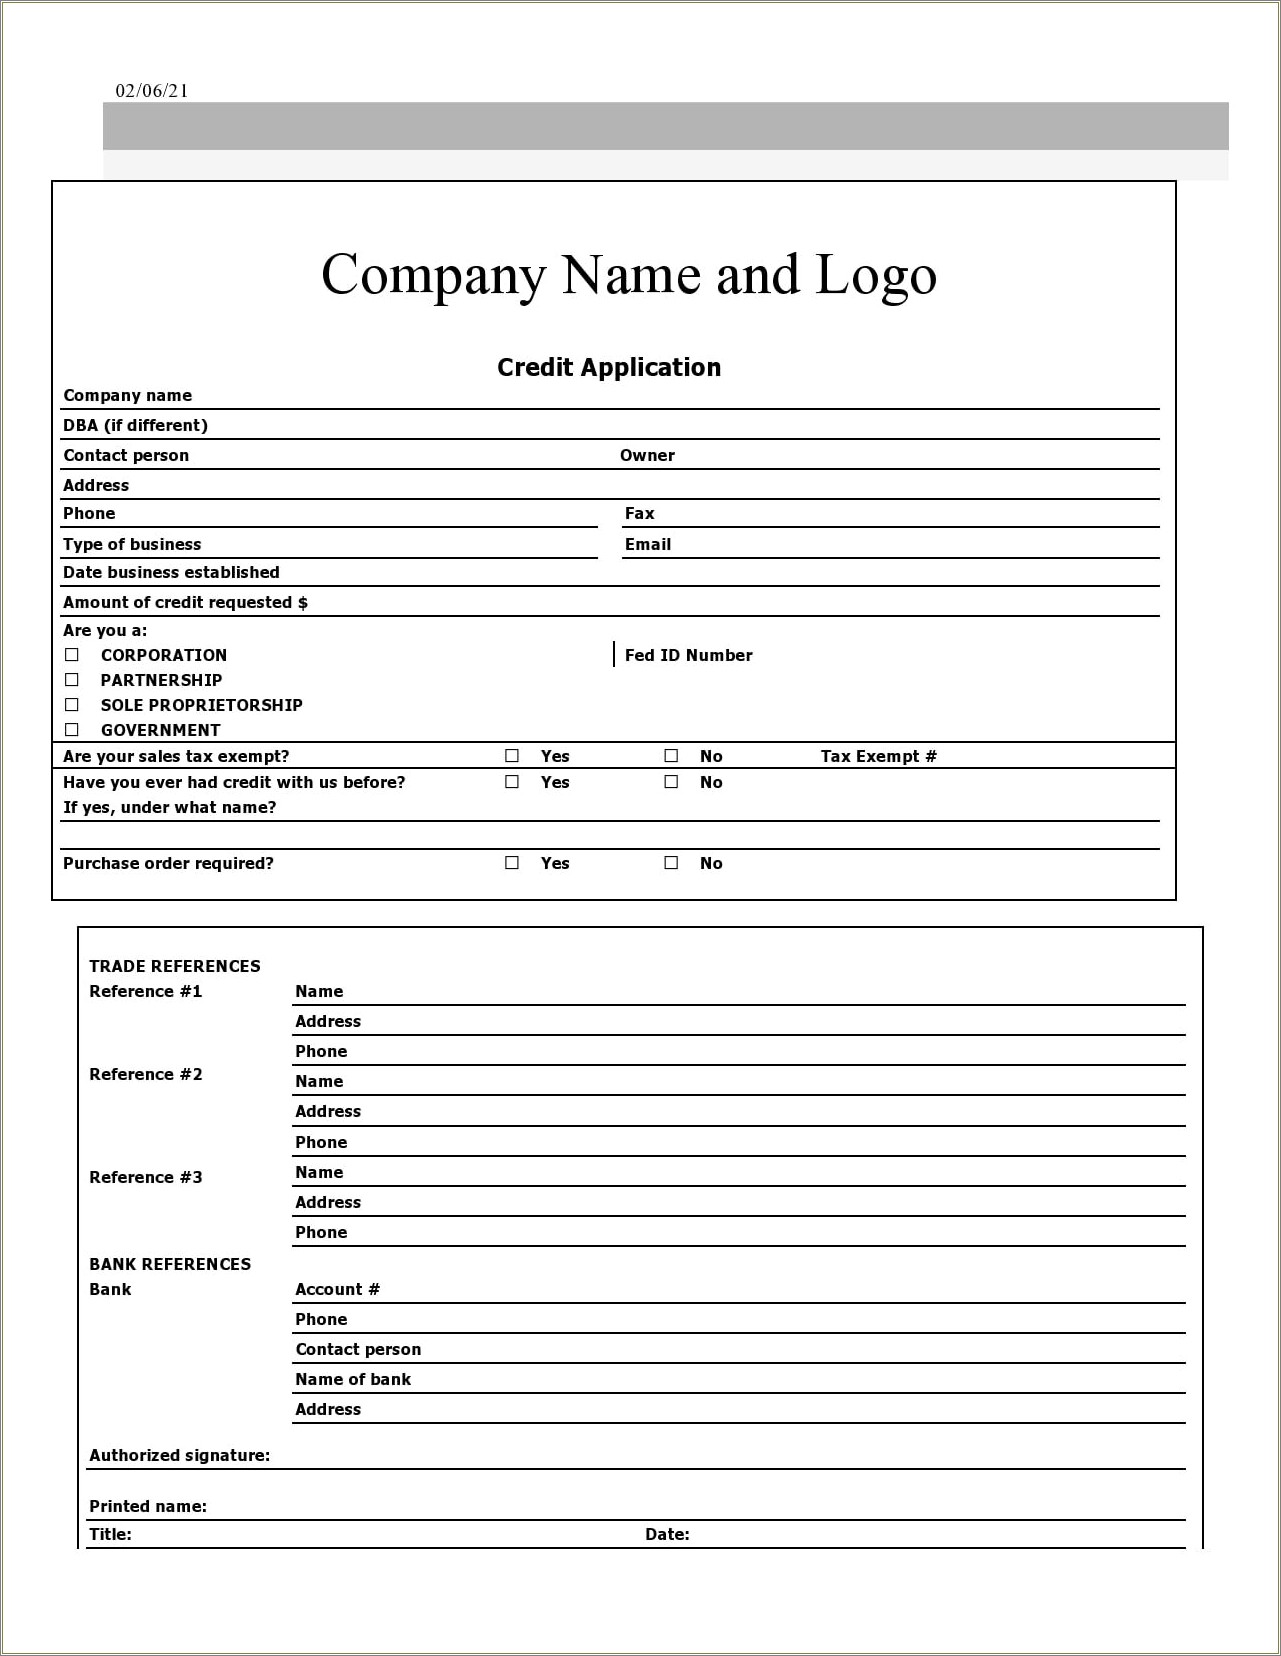 Credit Application Form Template Free South Africa